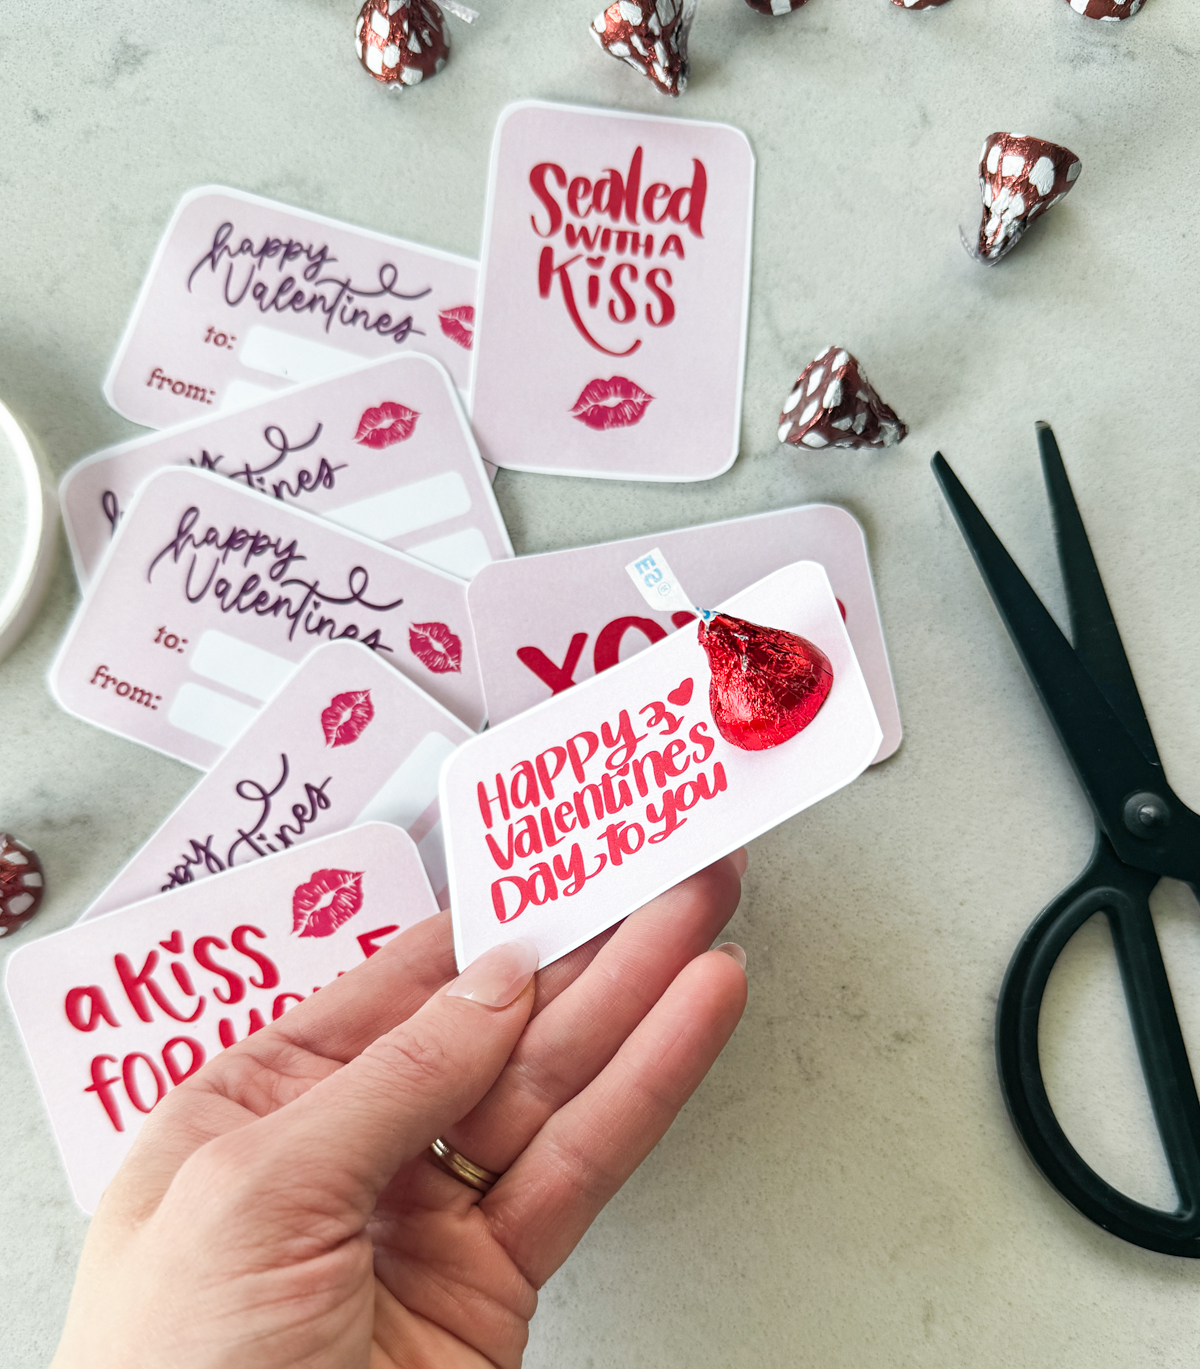 free printable valentines cards to pair with hershey's kisses. card being held says happy valentines day to you with red hersheys kiss attached to top with double sided tape